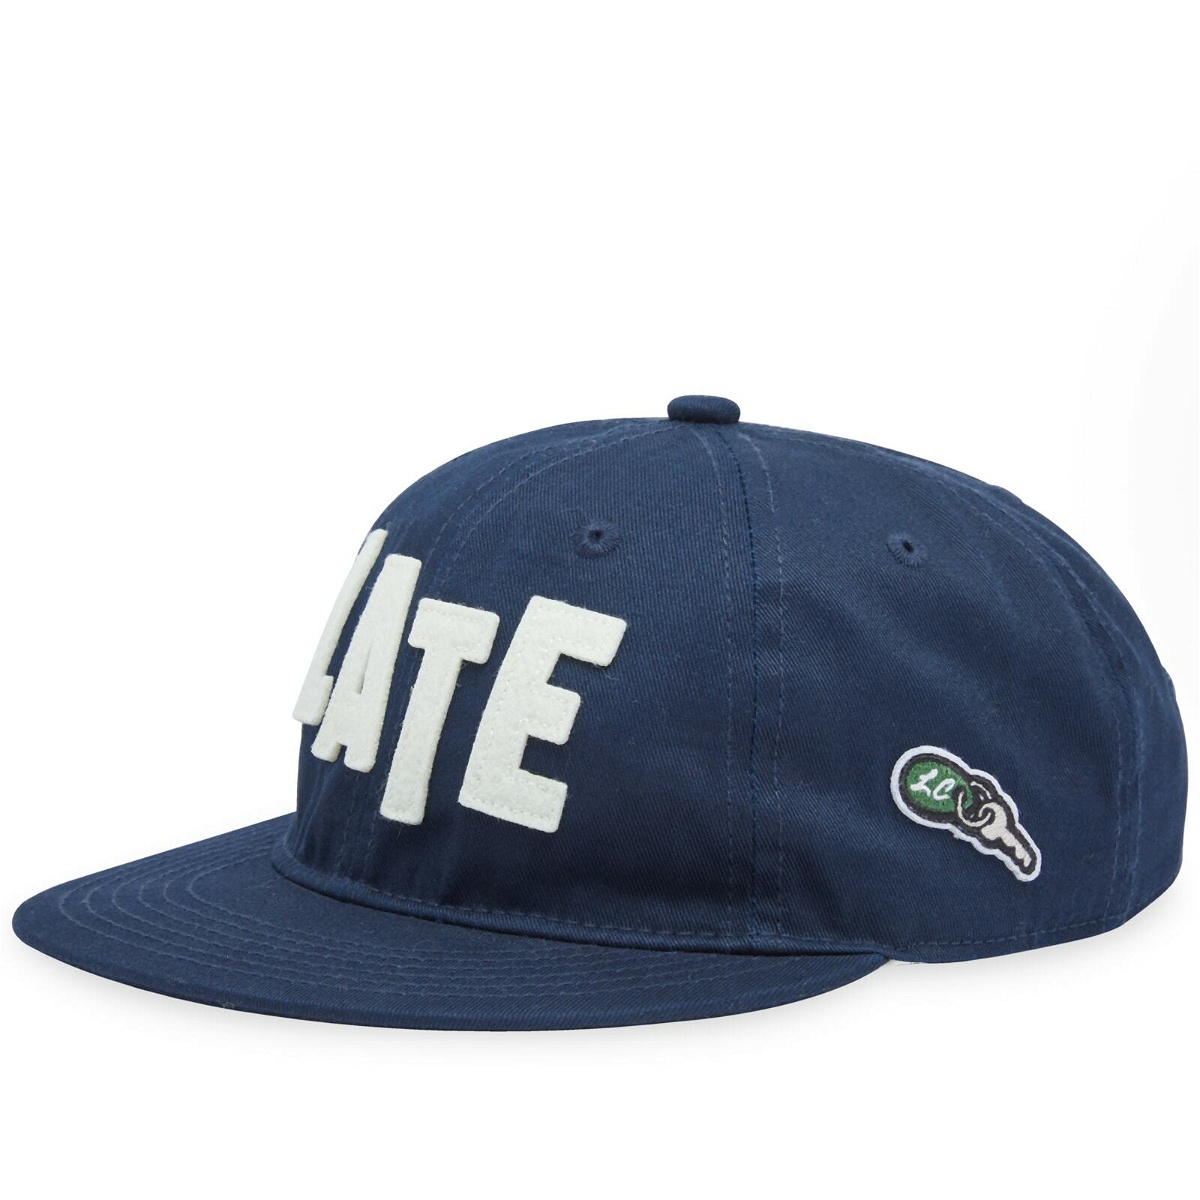 Photo: Late Checkout LATE 6 Panel Cap in Navy